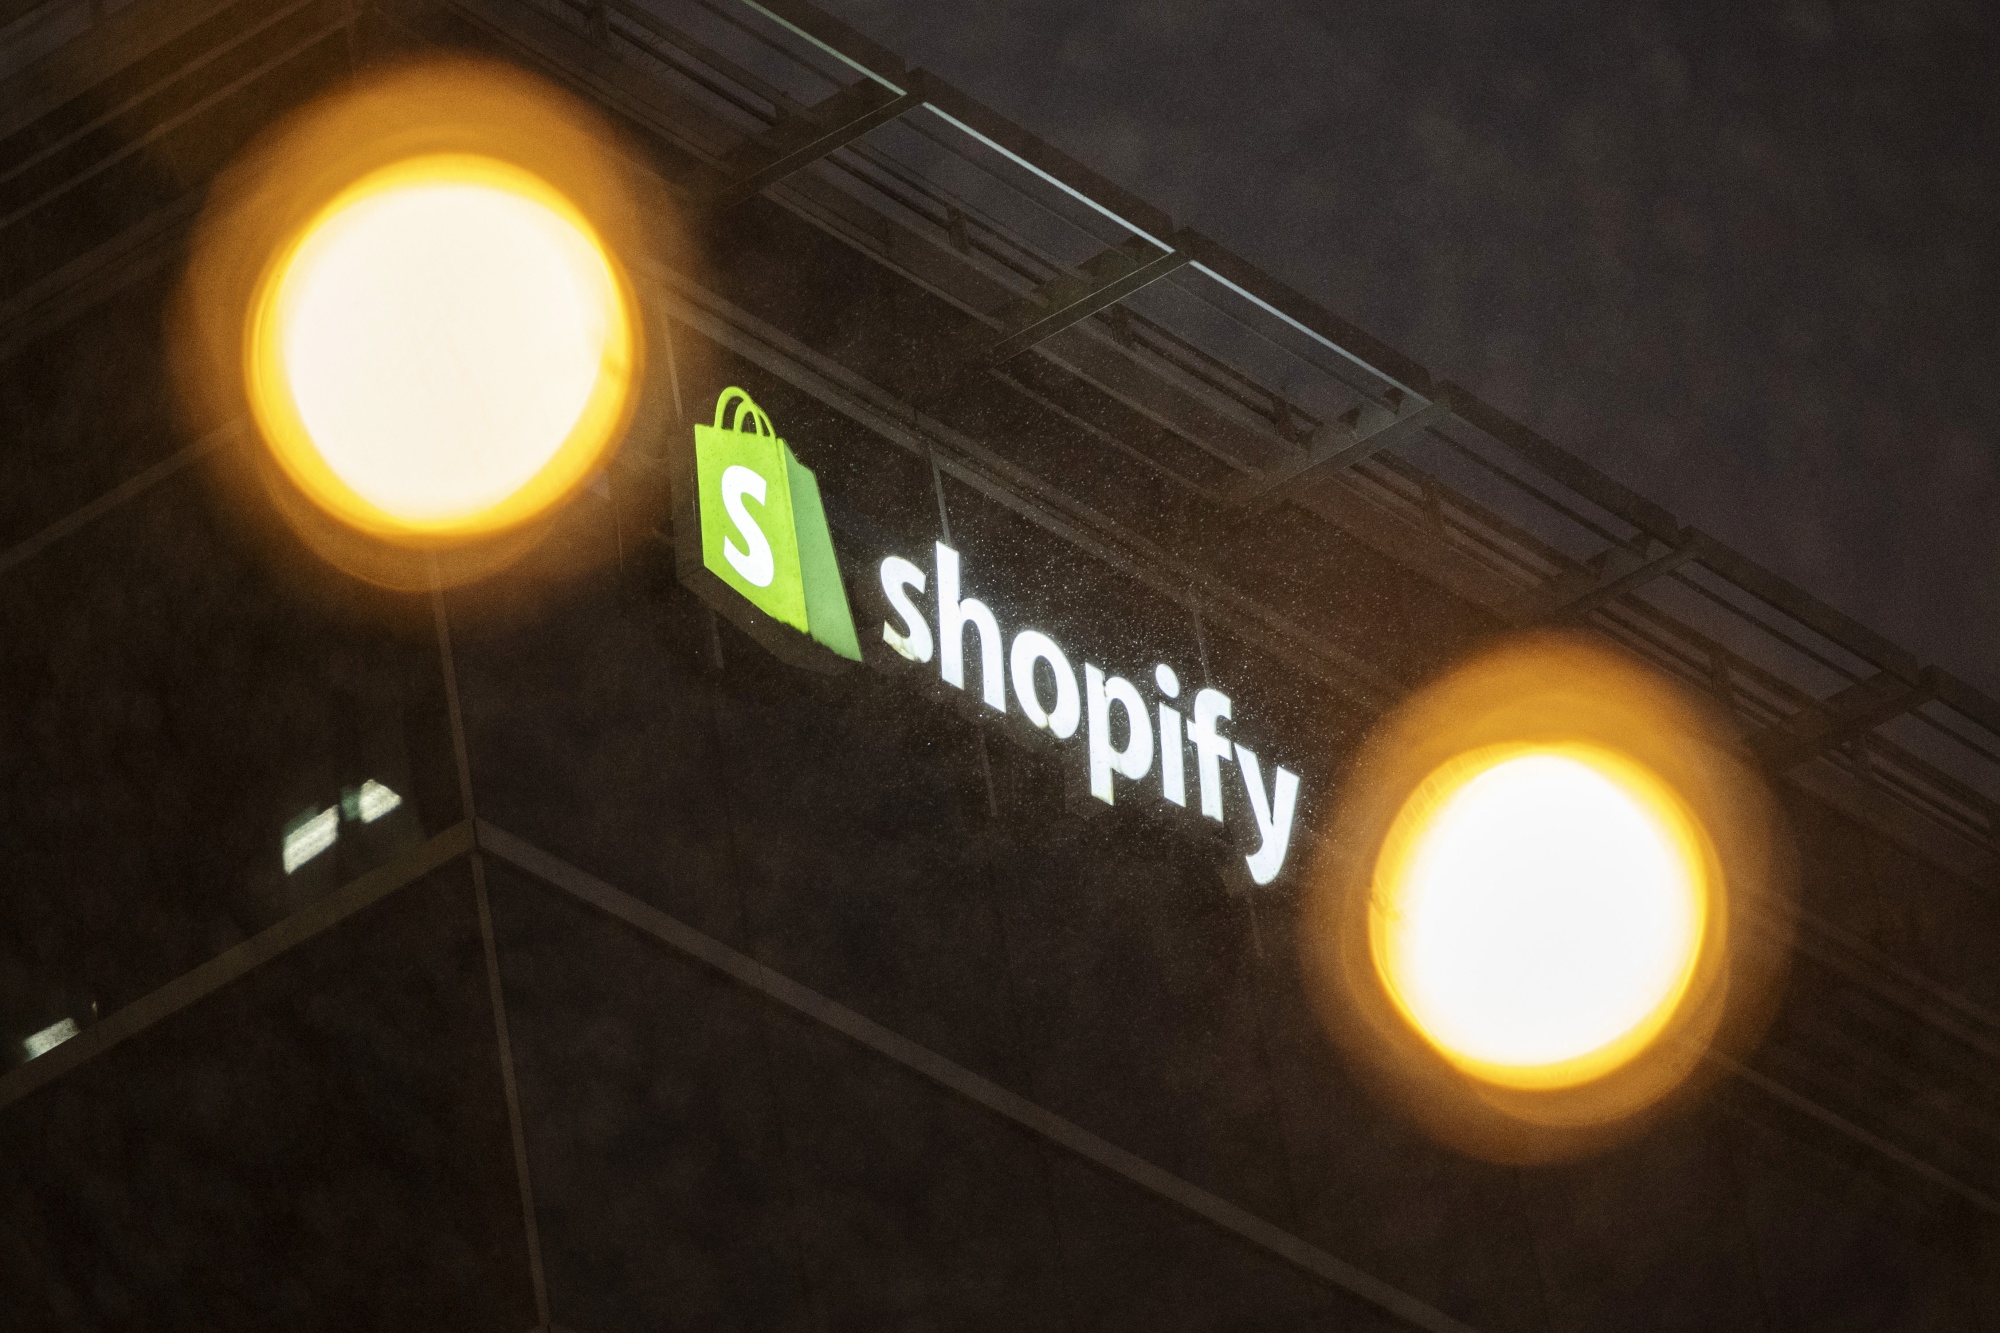 Shopify Sees 'Paradigm Shift' As Black Friday Approaches